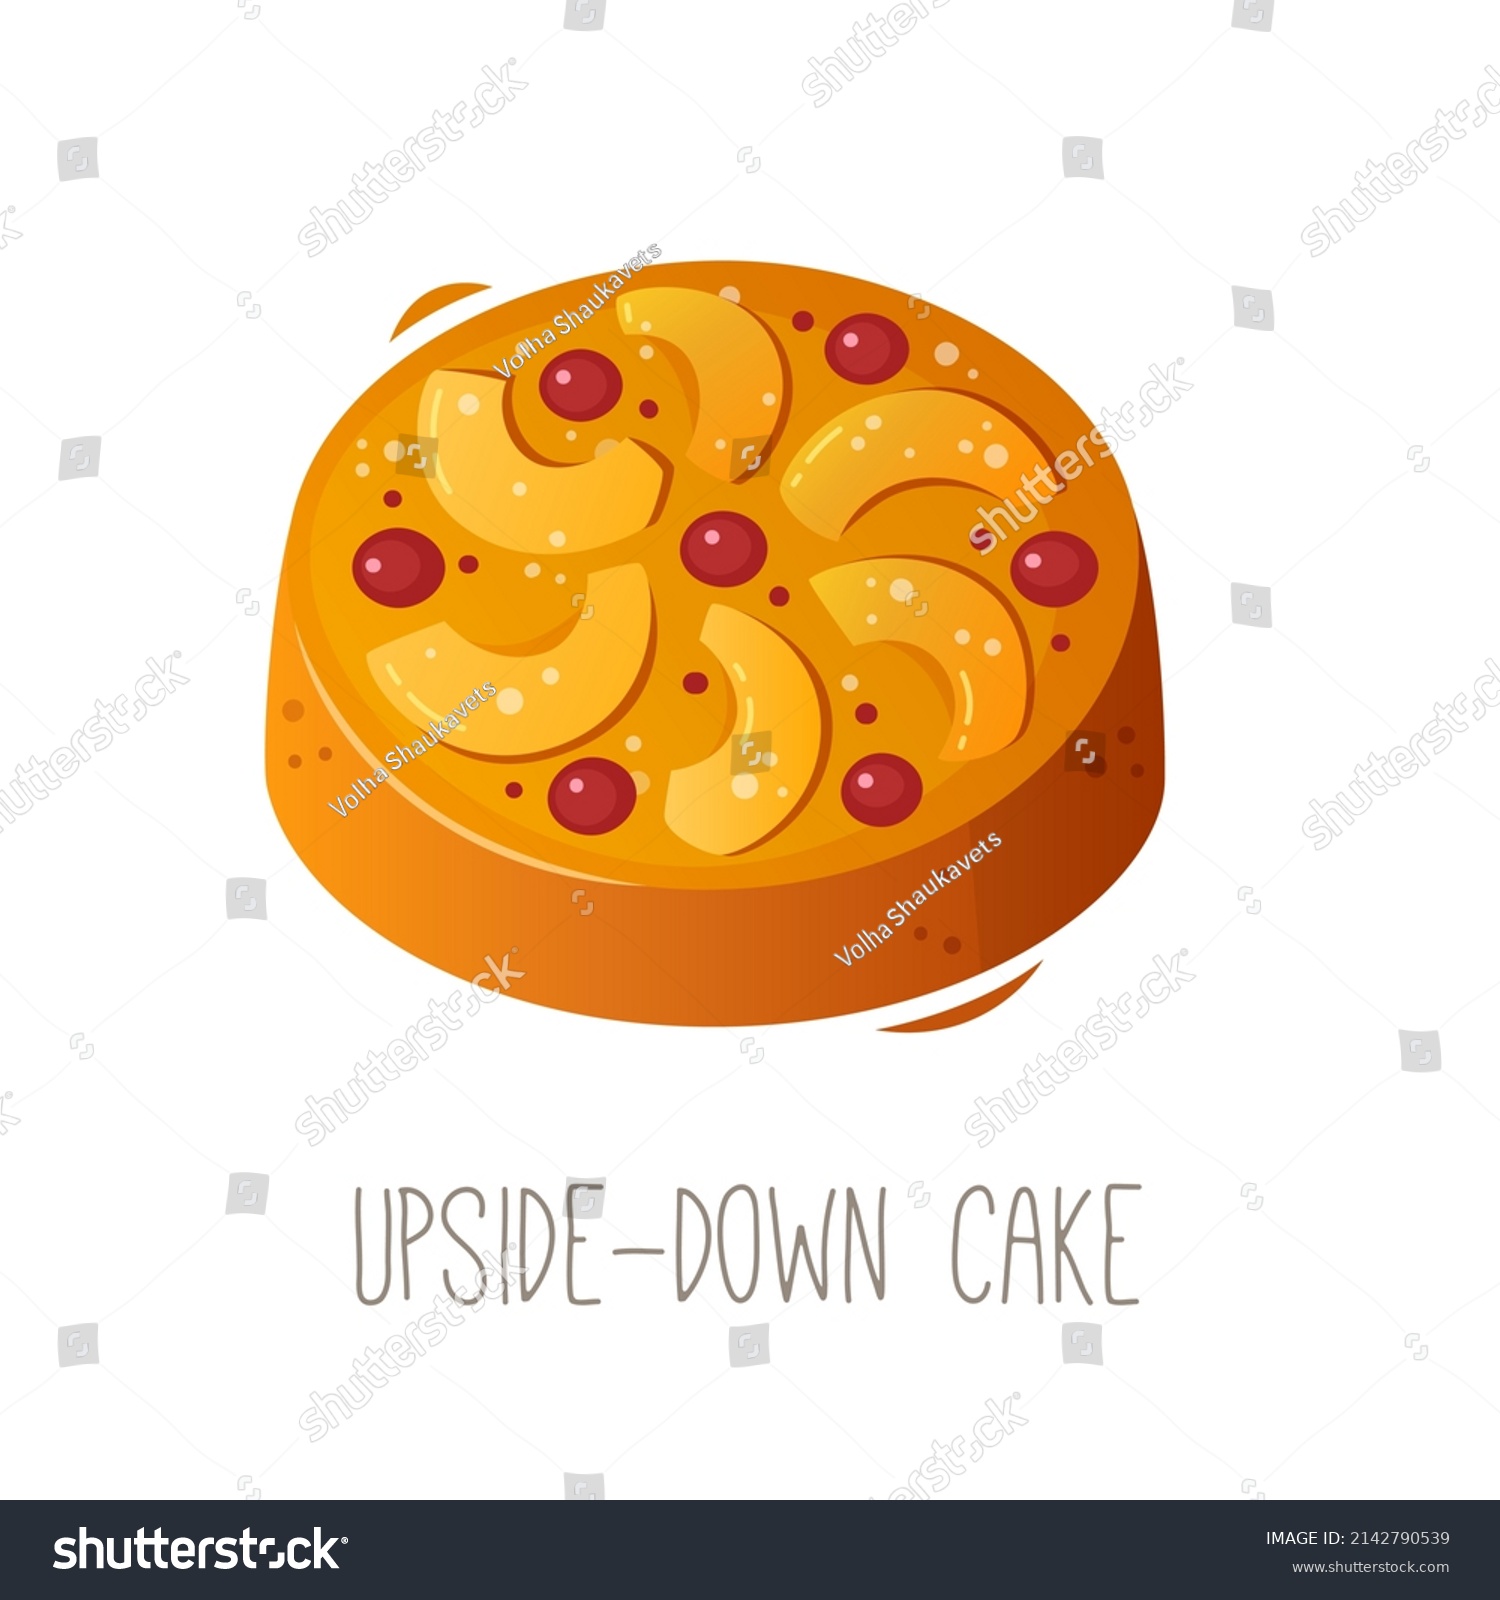 SVG of Collection of cakes, pies and desserts for all letters of alphabet. Letter U - upside down cake. Pie made of batter, pineapples peaches or fruit and caramel. Isolated vector image for menu designs. svg